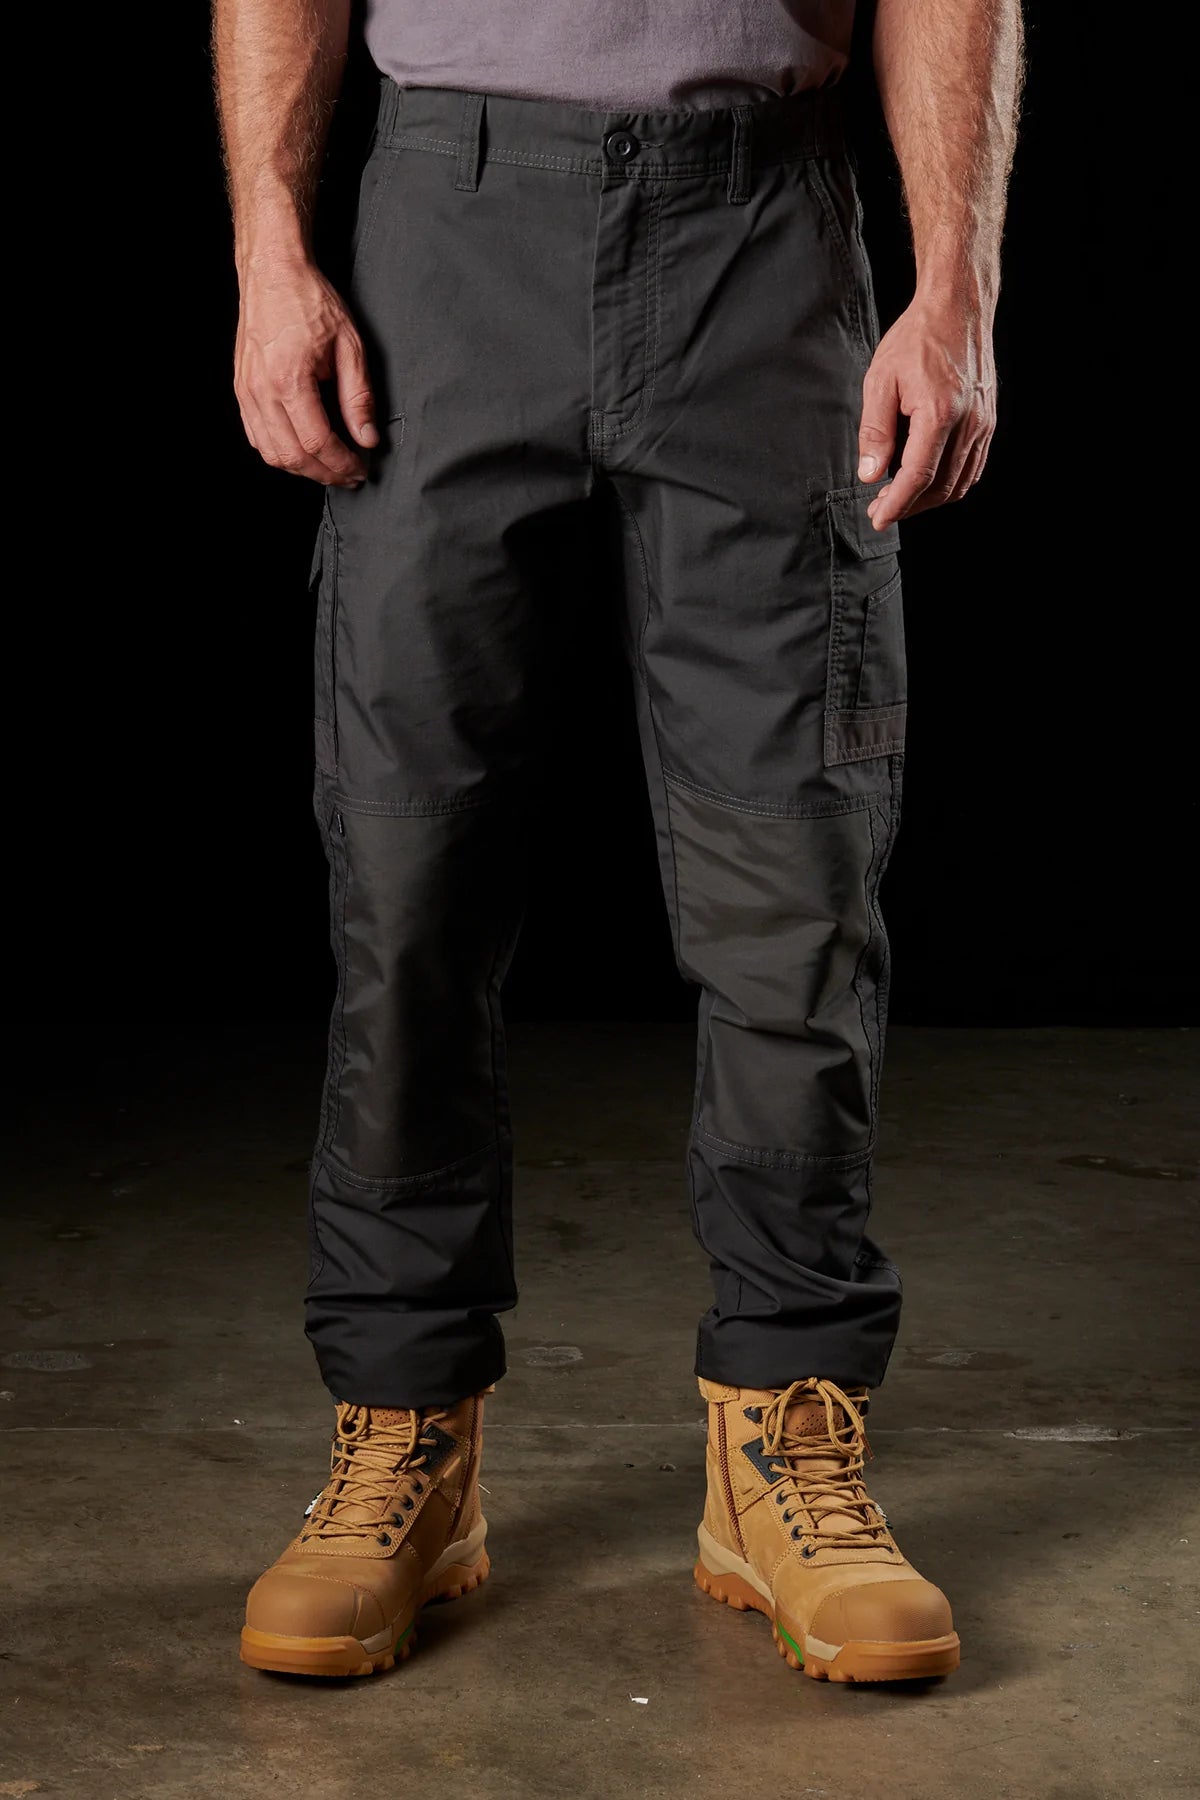 FXD WP5 Stretch Work Pants